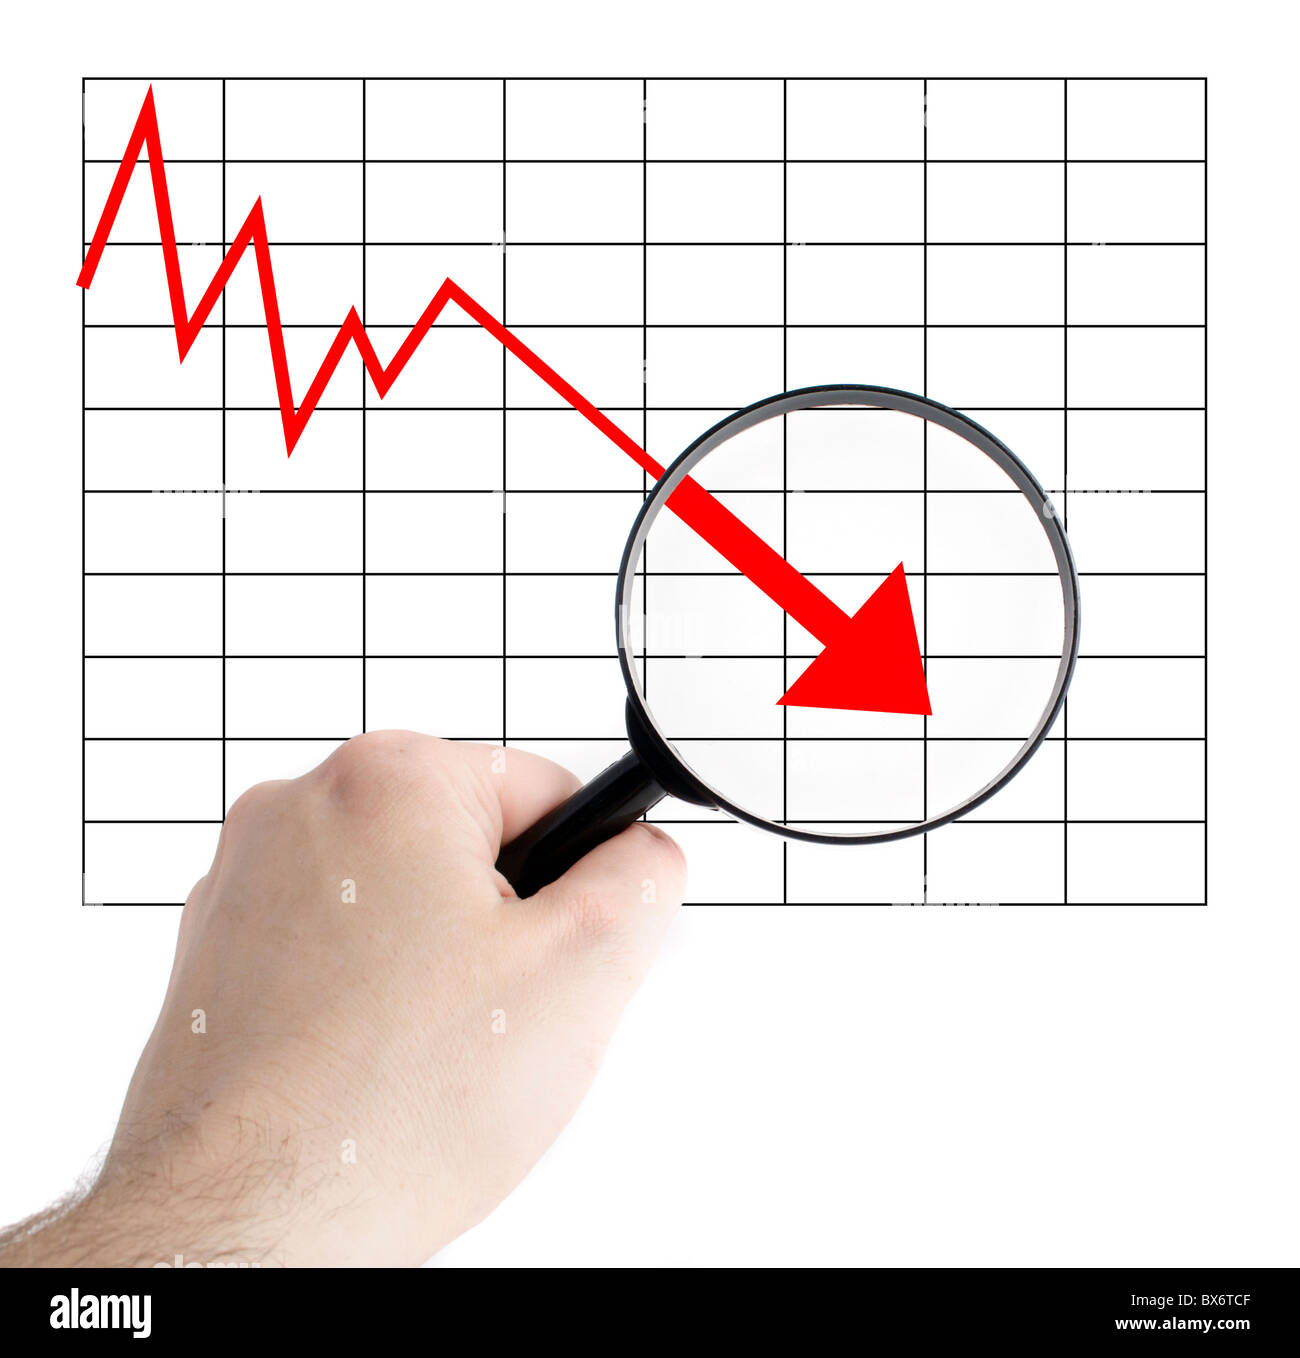 A person analyzes a negative chart. All on white background. Stock Photo